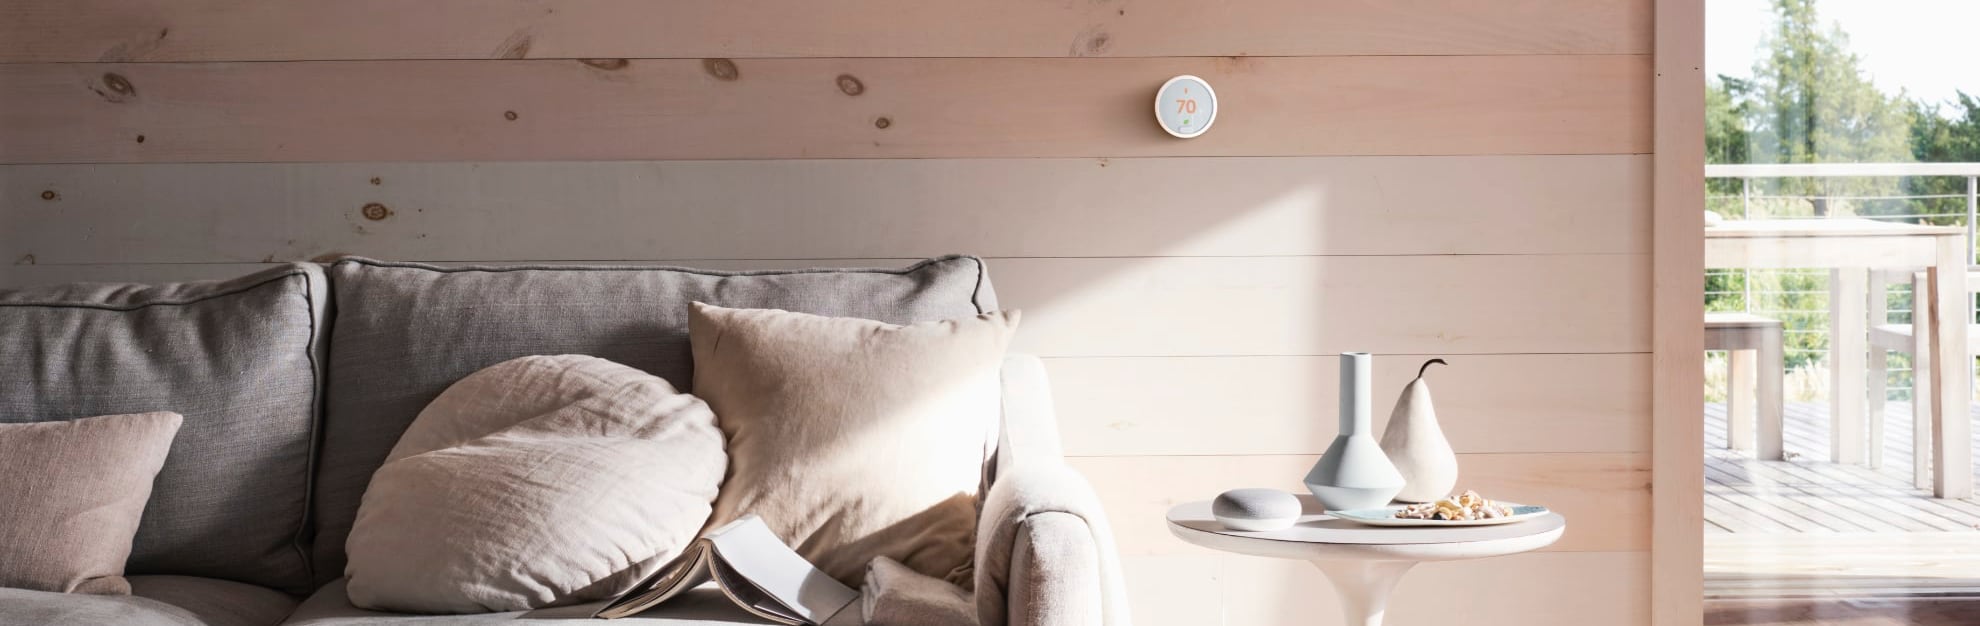 Vivint Home Automation in Hagerstown